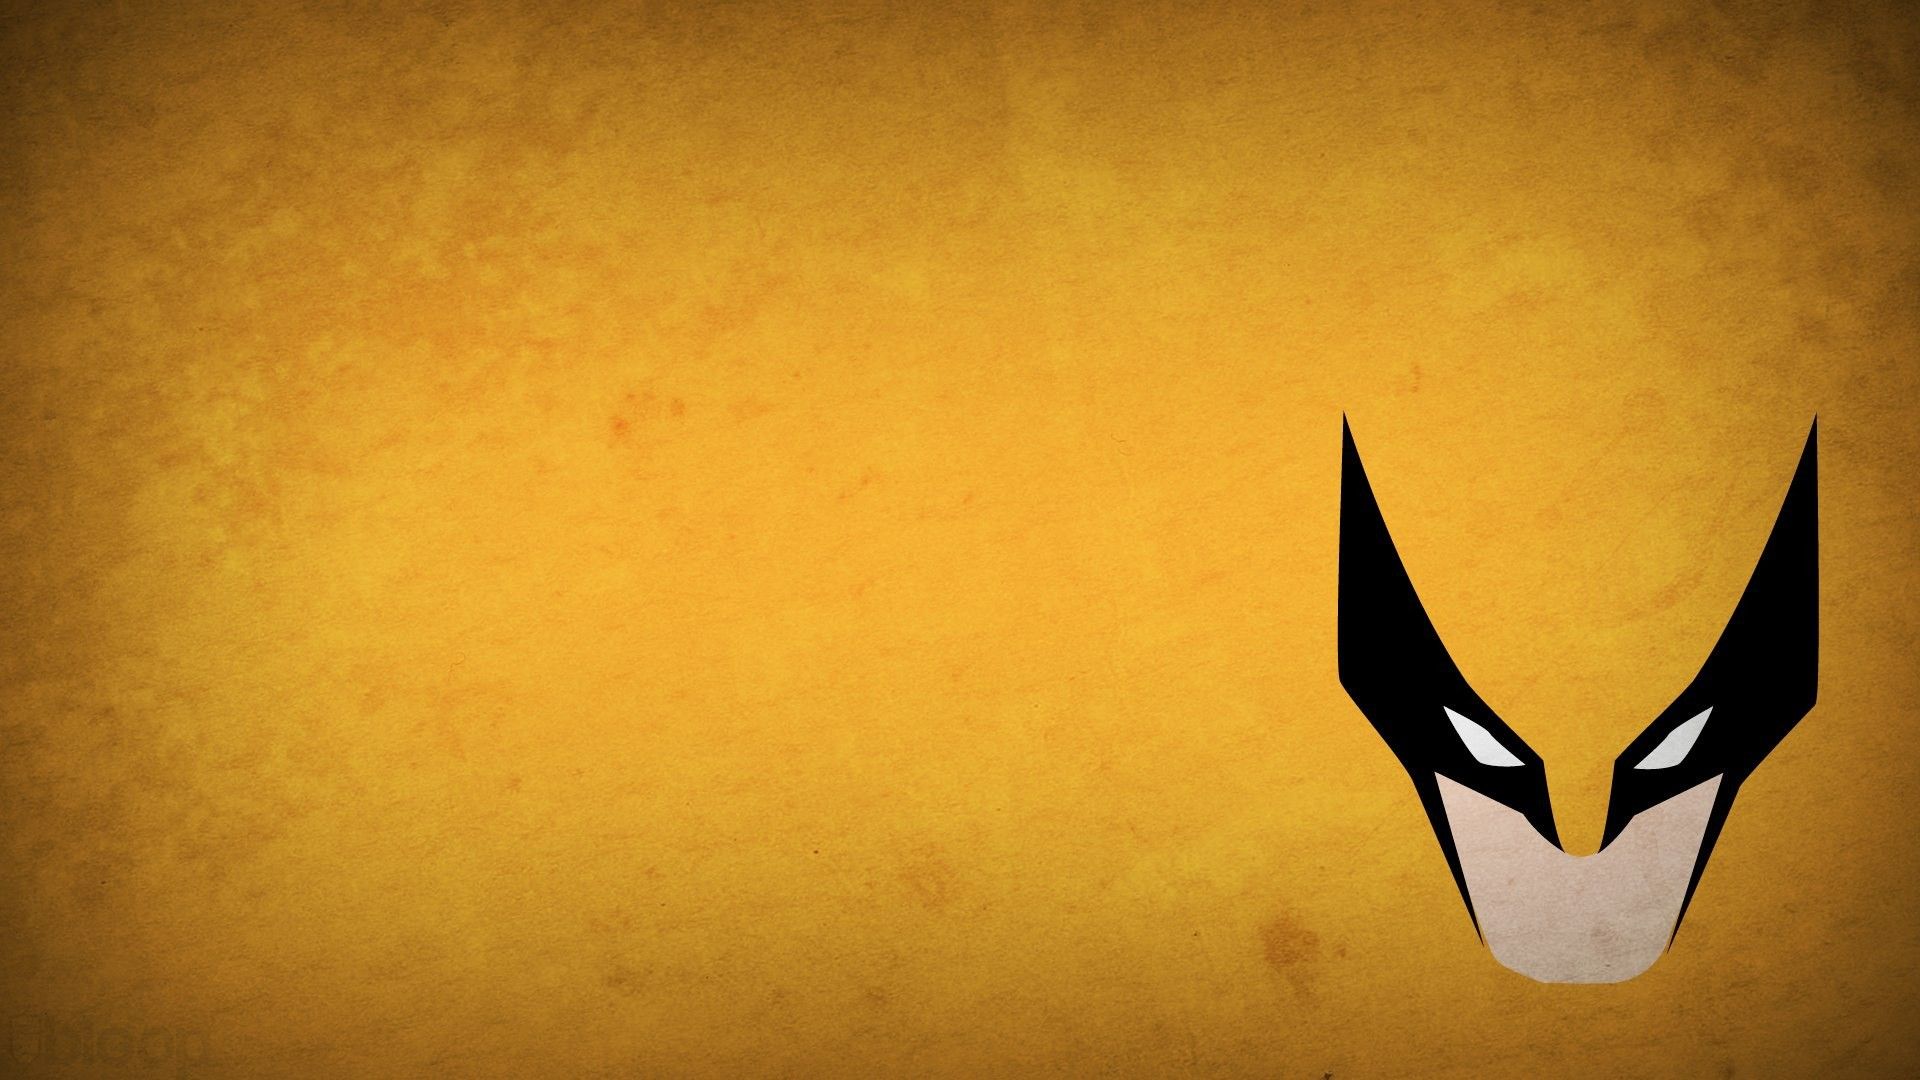 Wolverine, yellow background wallpapers and images - wallpapers ...